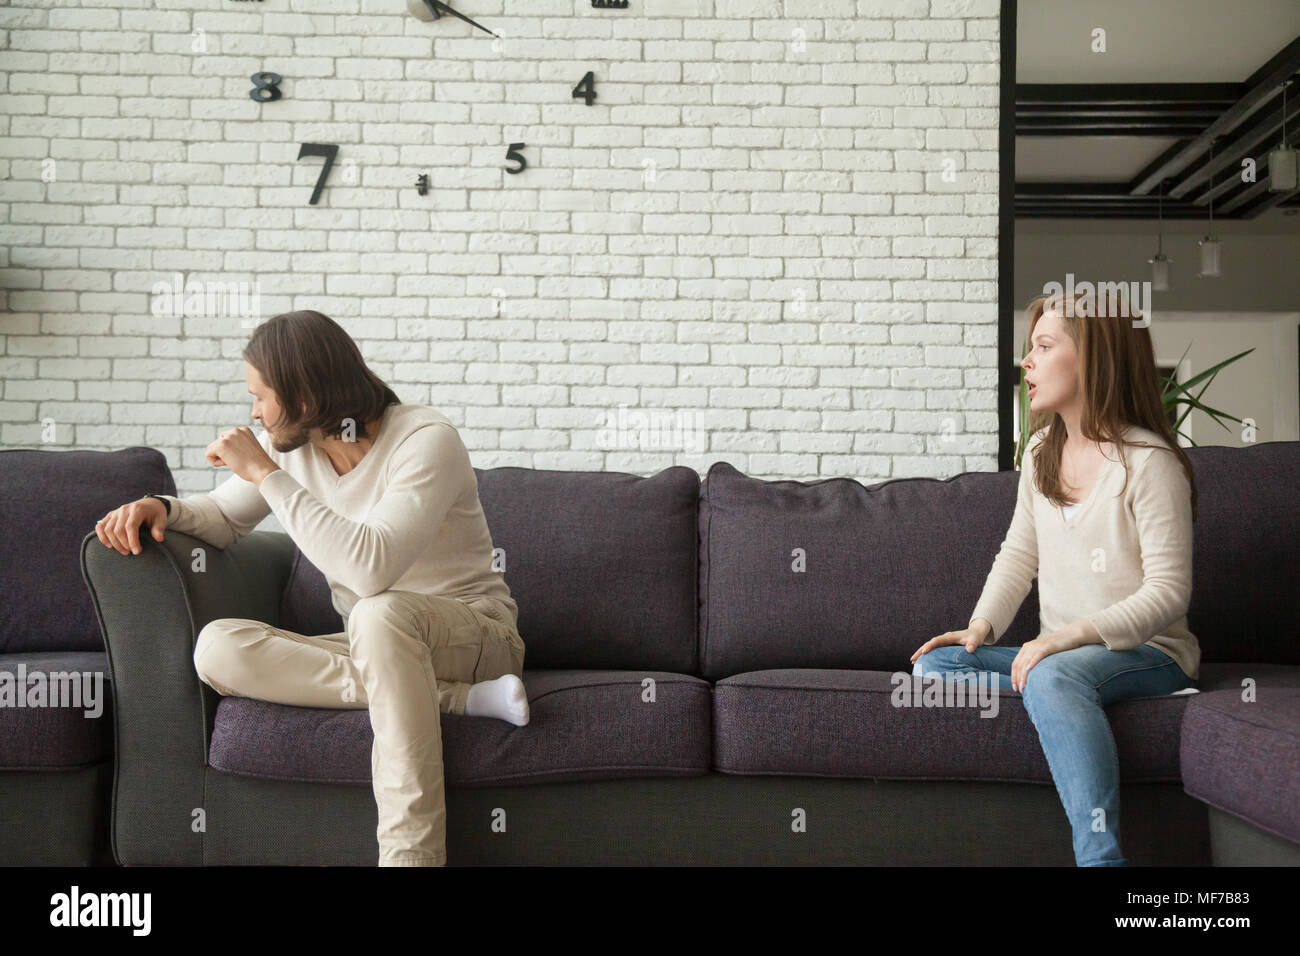 Frustrated husband ignoring angry wife avoiding argument sitting Stock Photo